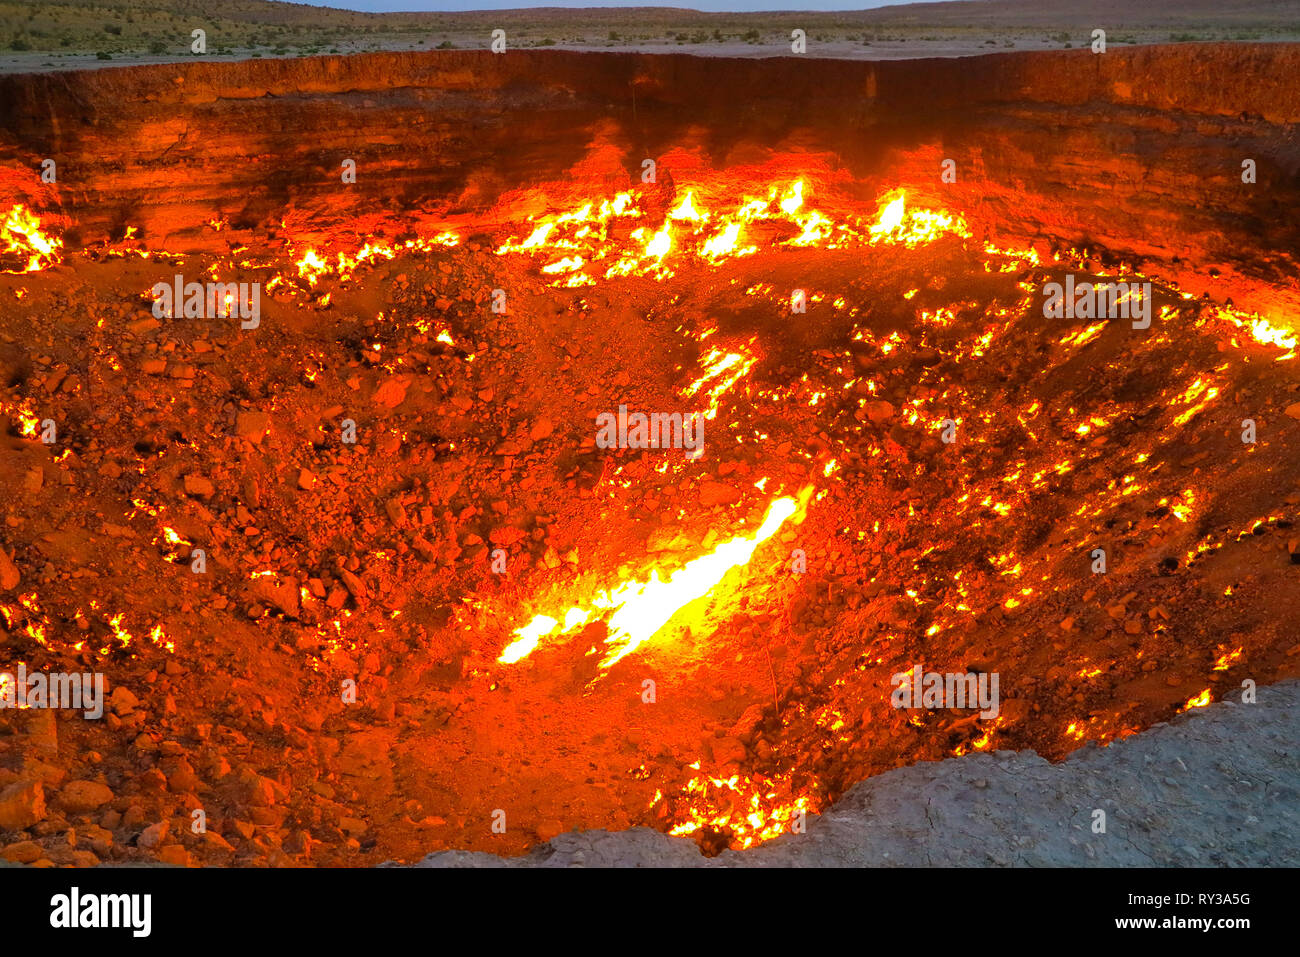 Darvaza Gas Crater Pit Breathtaking Flames Close Up at Sunrise Stock Photo